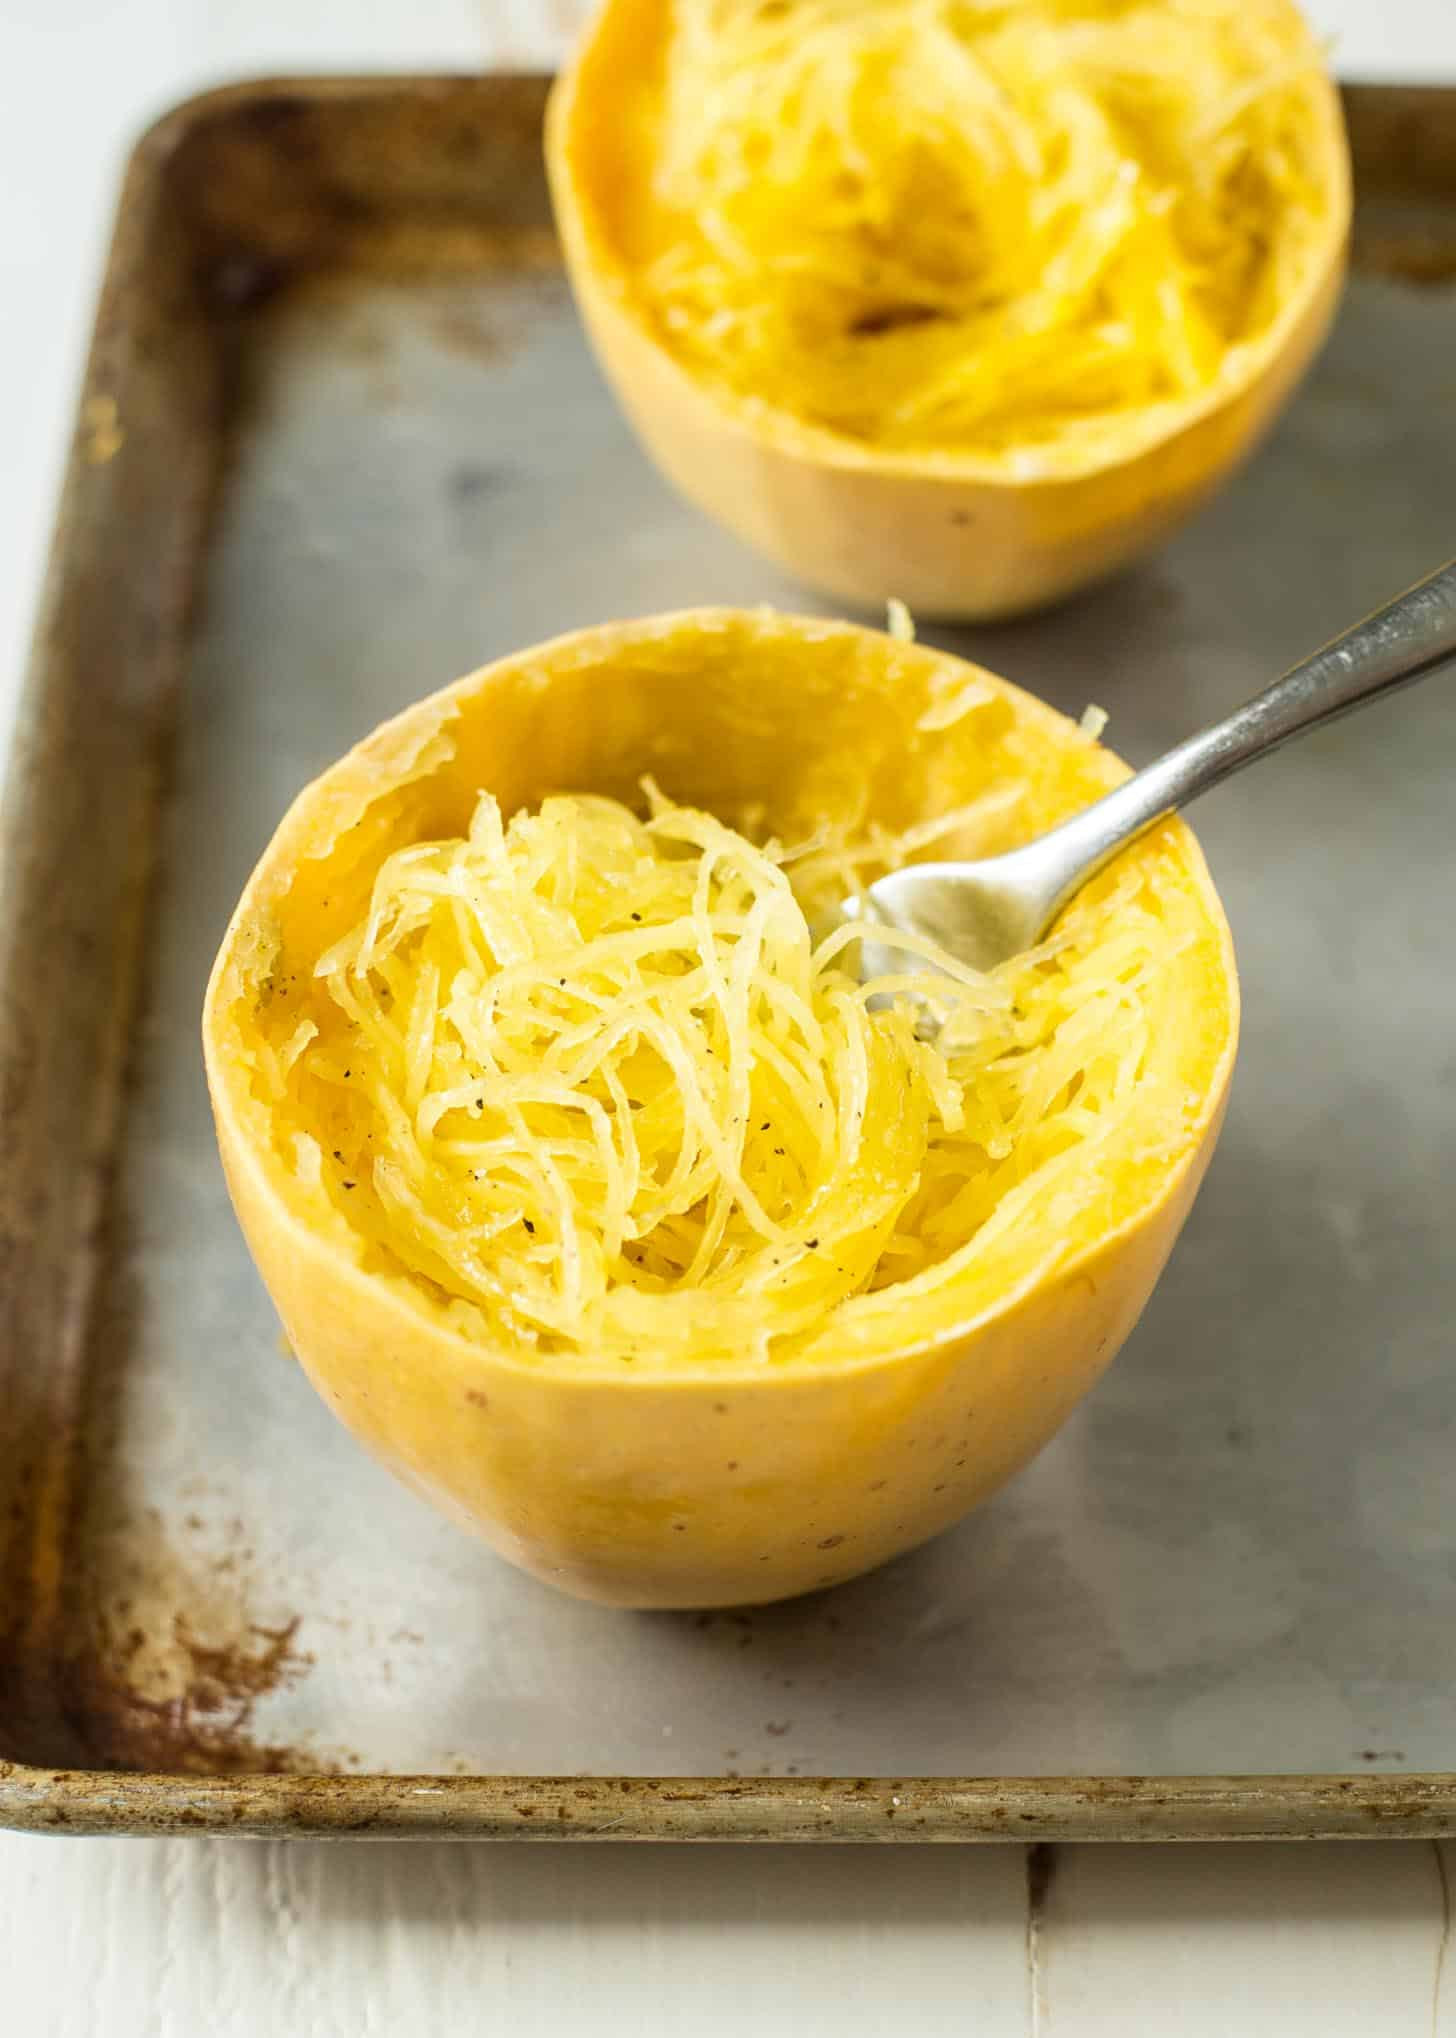 Cooking Spaghetti Squash In Microwave
 How to Cook Spaghetti Squash Instant Pot Slow Cooker